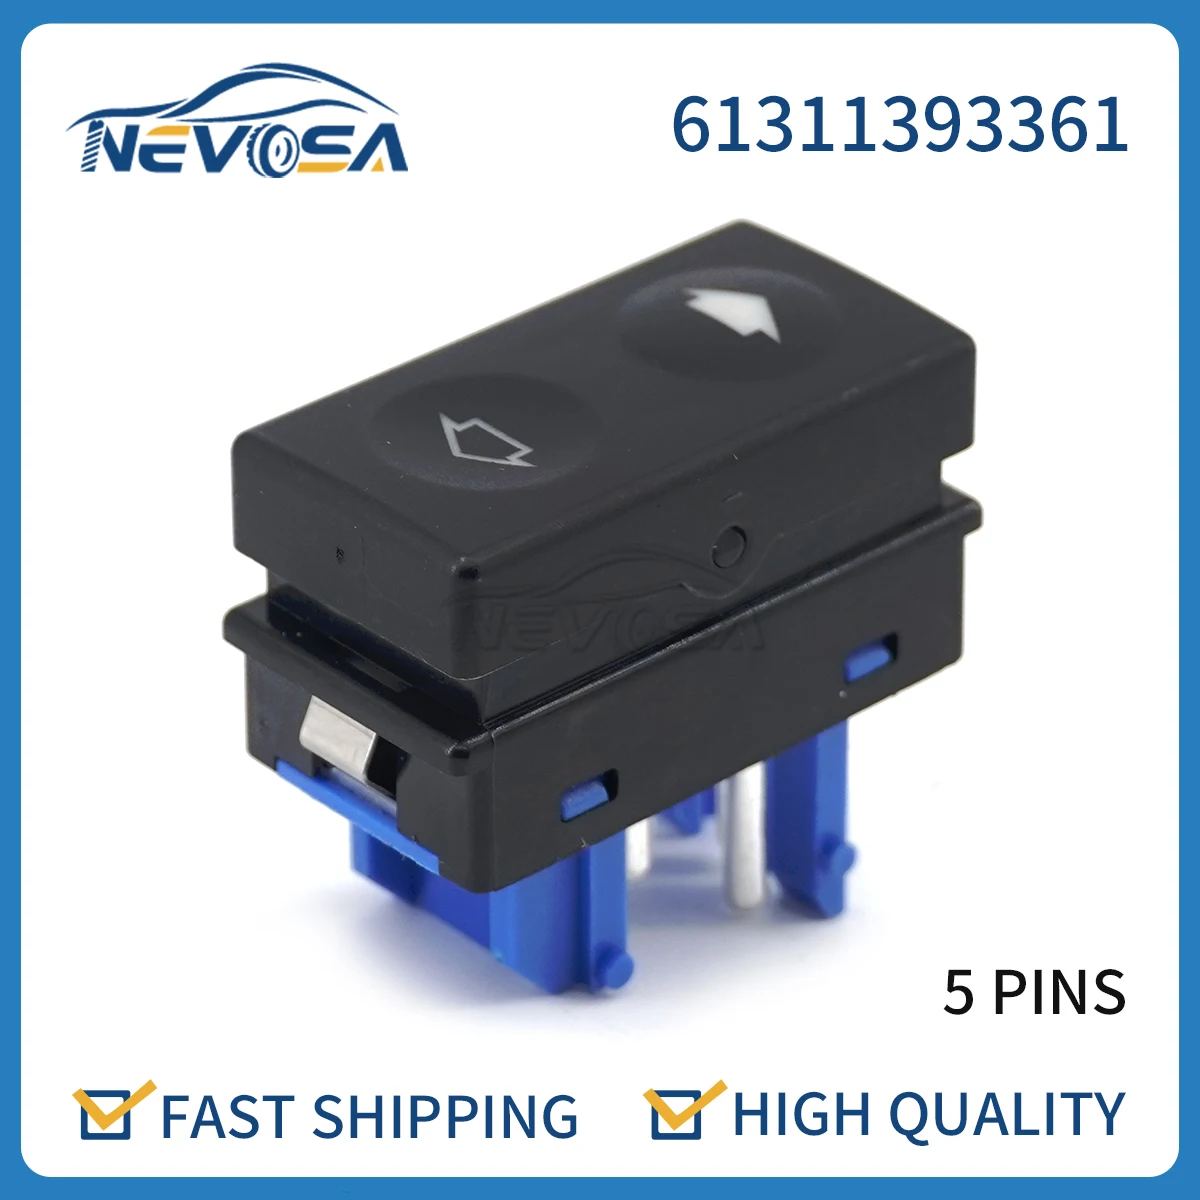 Nevosa 61311393361 For BMW E36 3 Series 318iS 328i M3 Z3 Power Car Window Control Switch Lifter Button Blue Base Car accessories